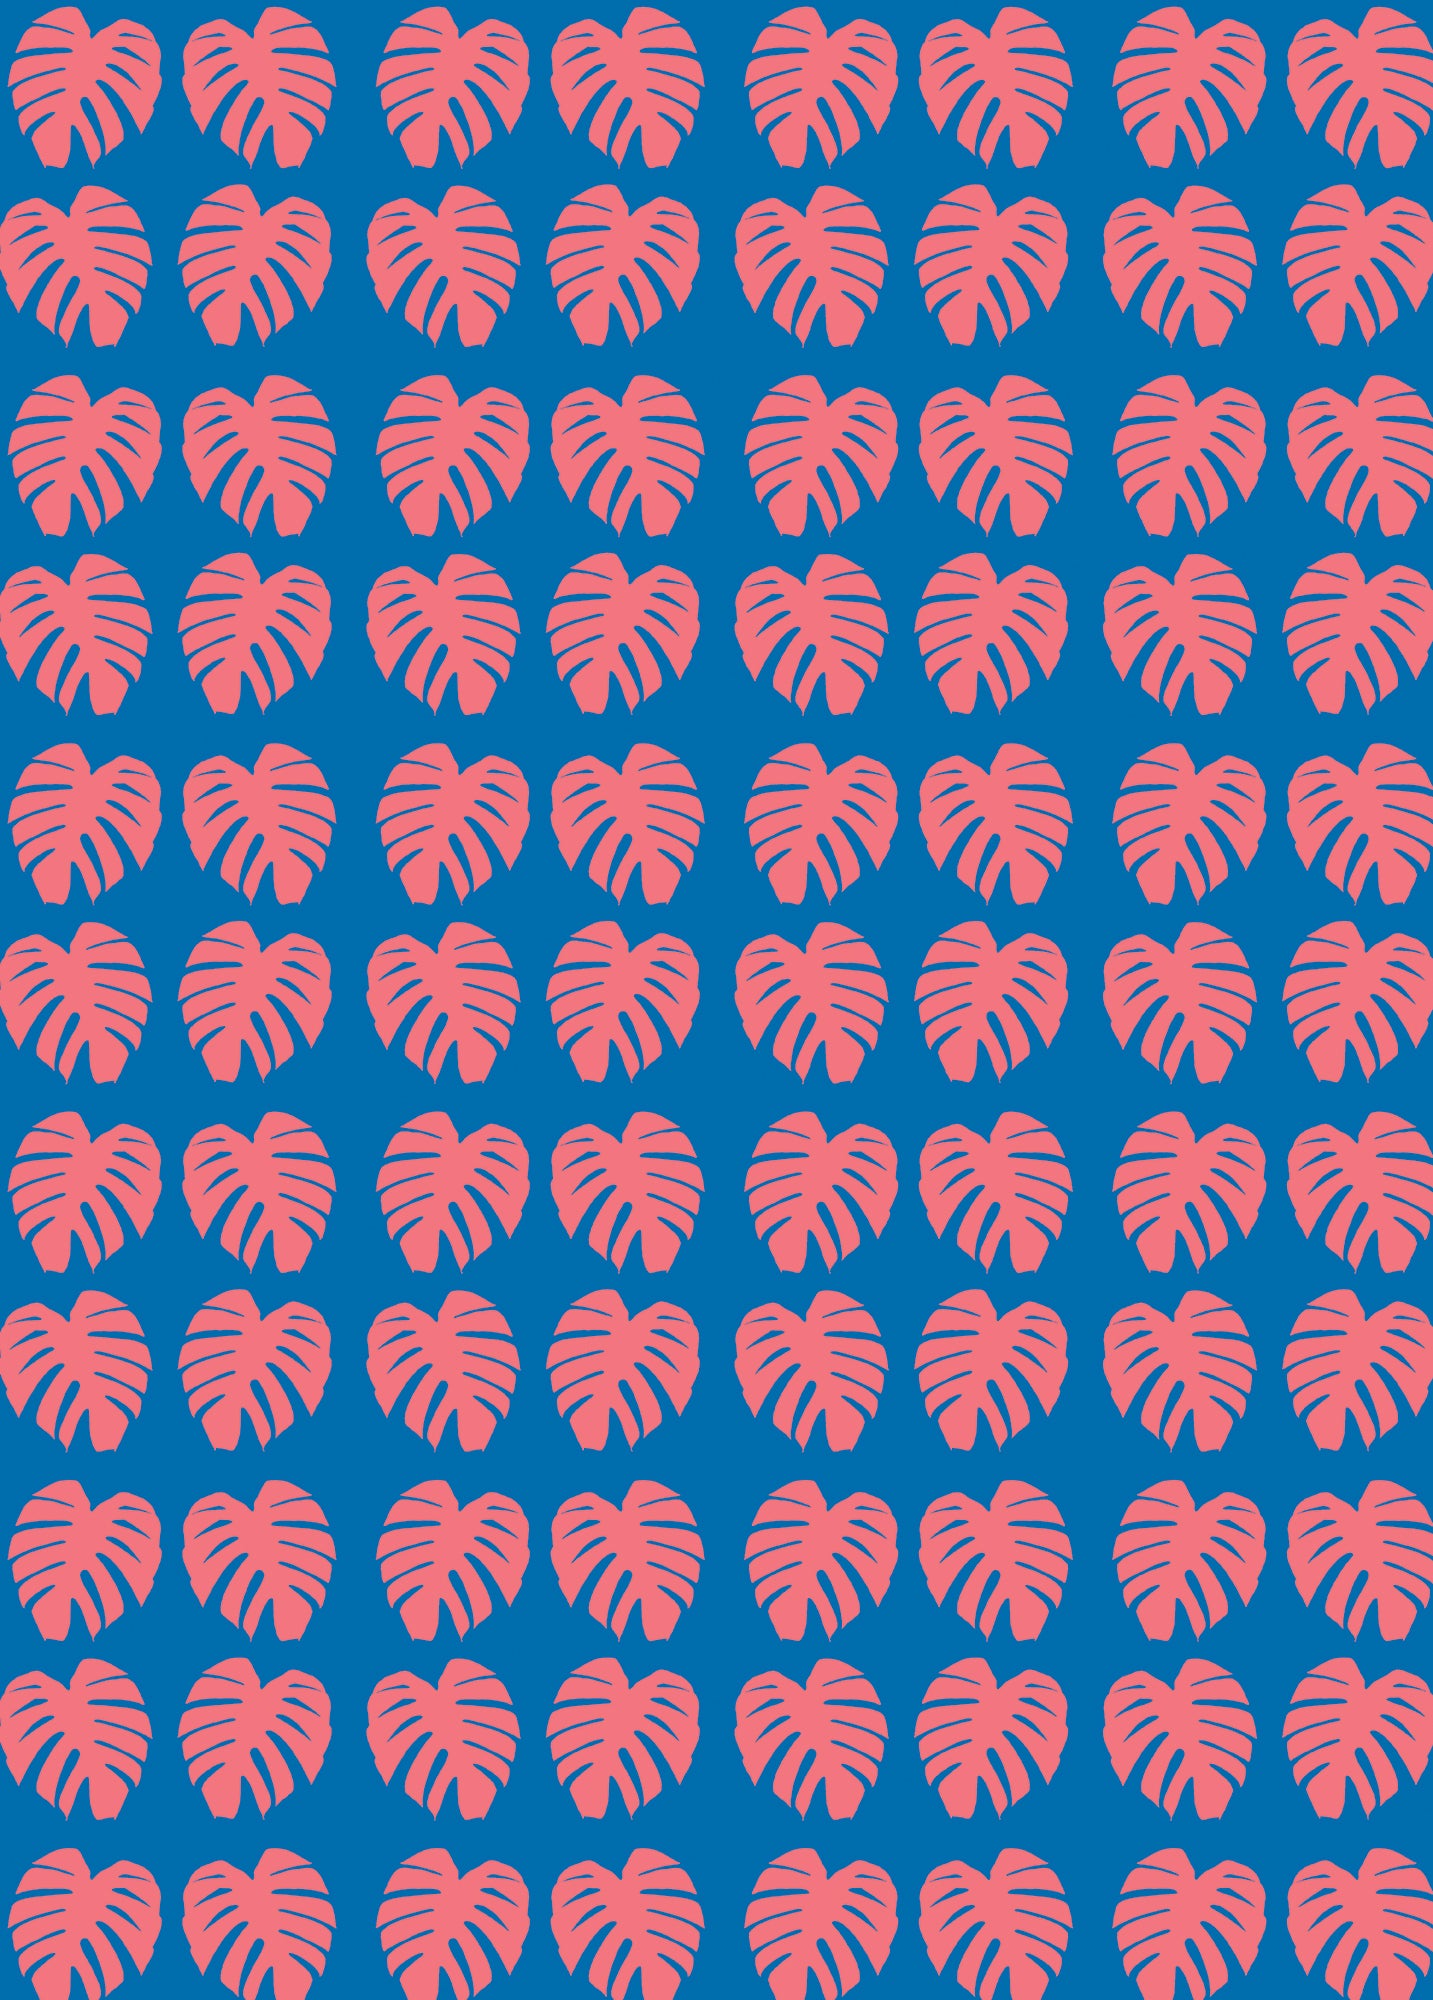 Monstera leaf wrapping paper - Inspired 